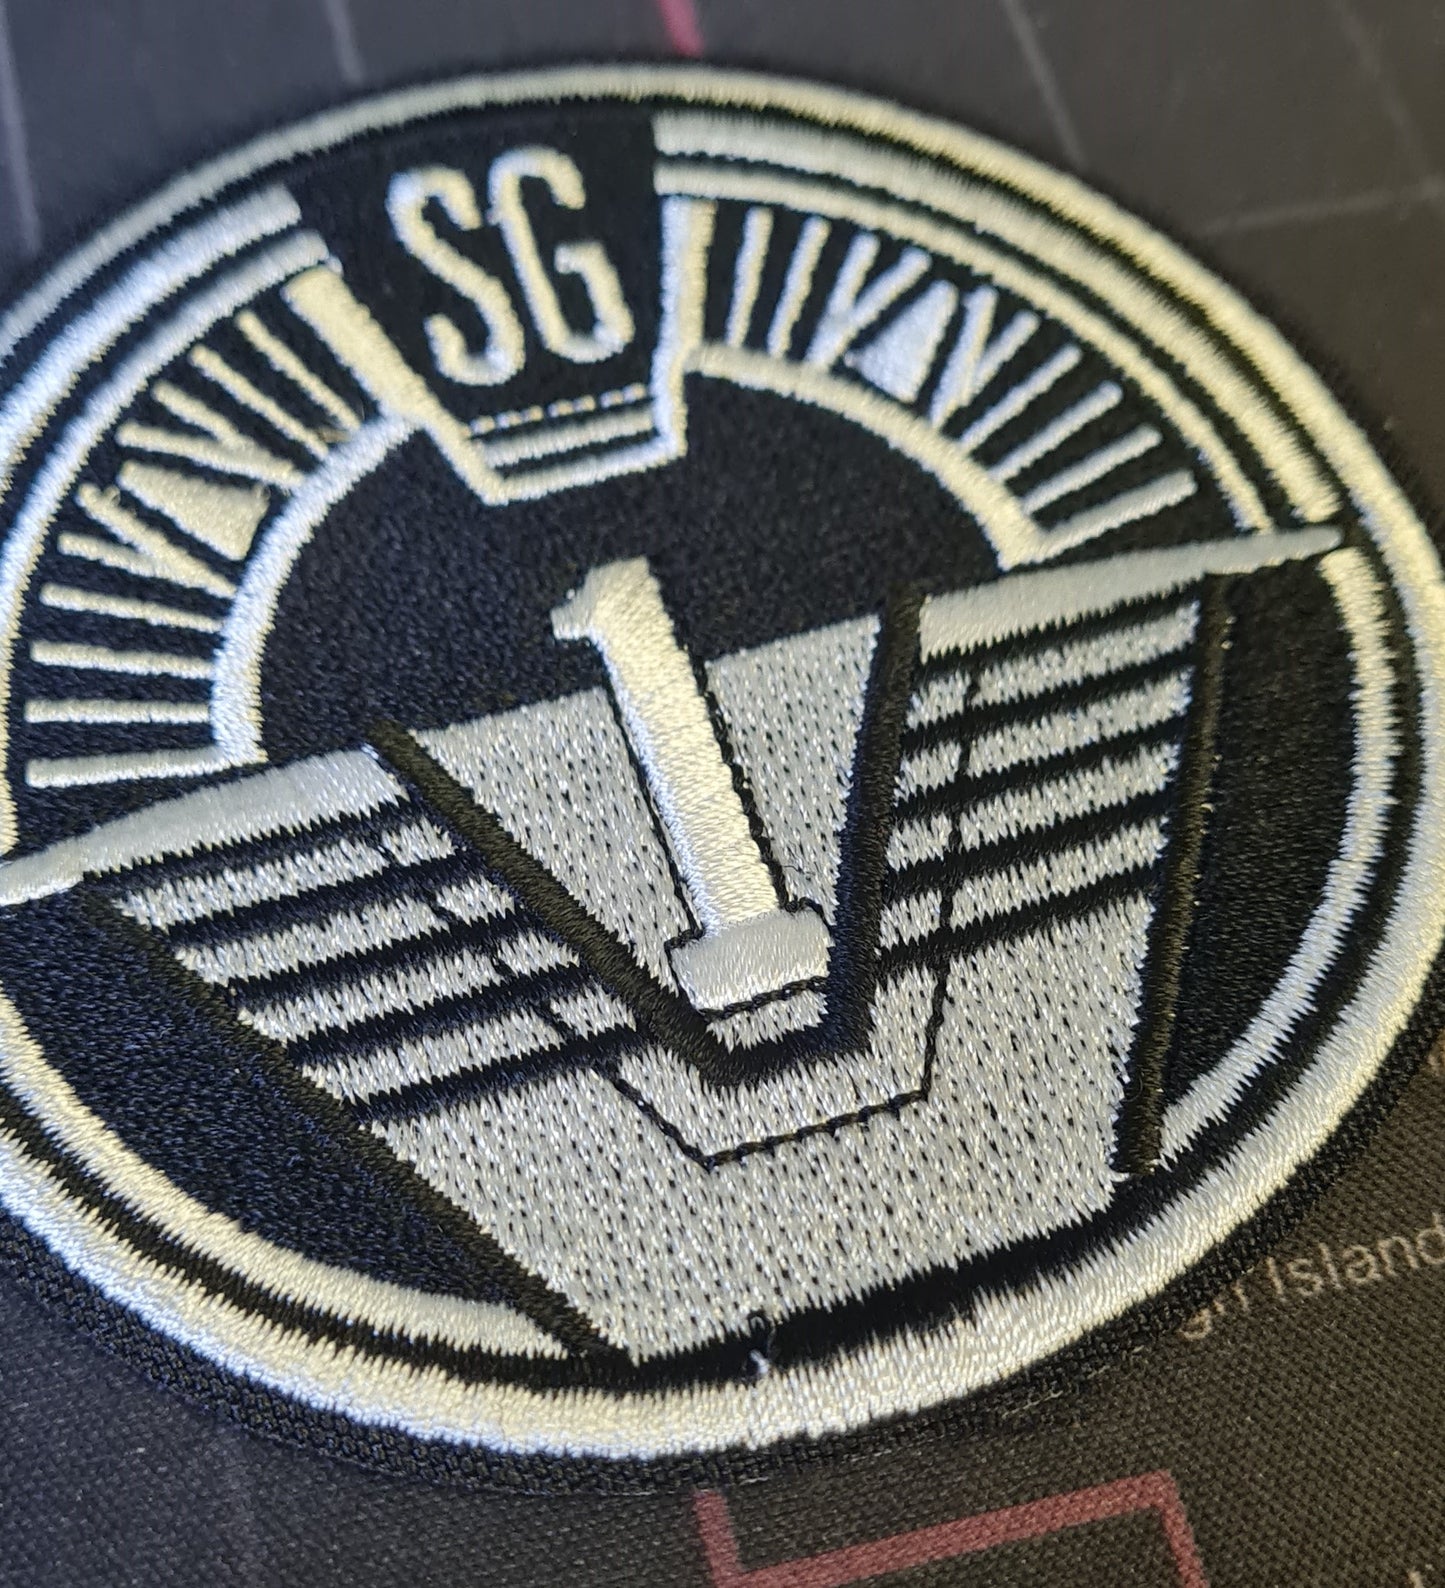 Stargate Inspired Patches. Embroidery Patches. Heat seal patches. Sg1 Patches